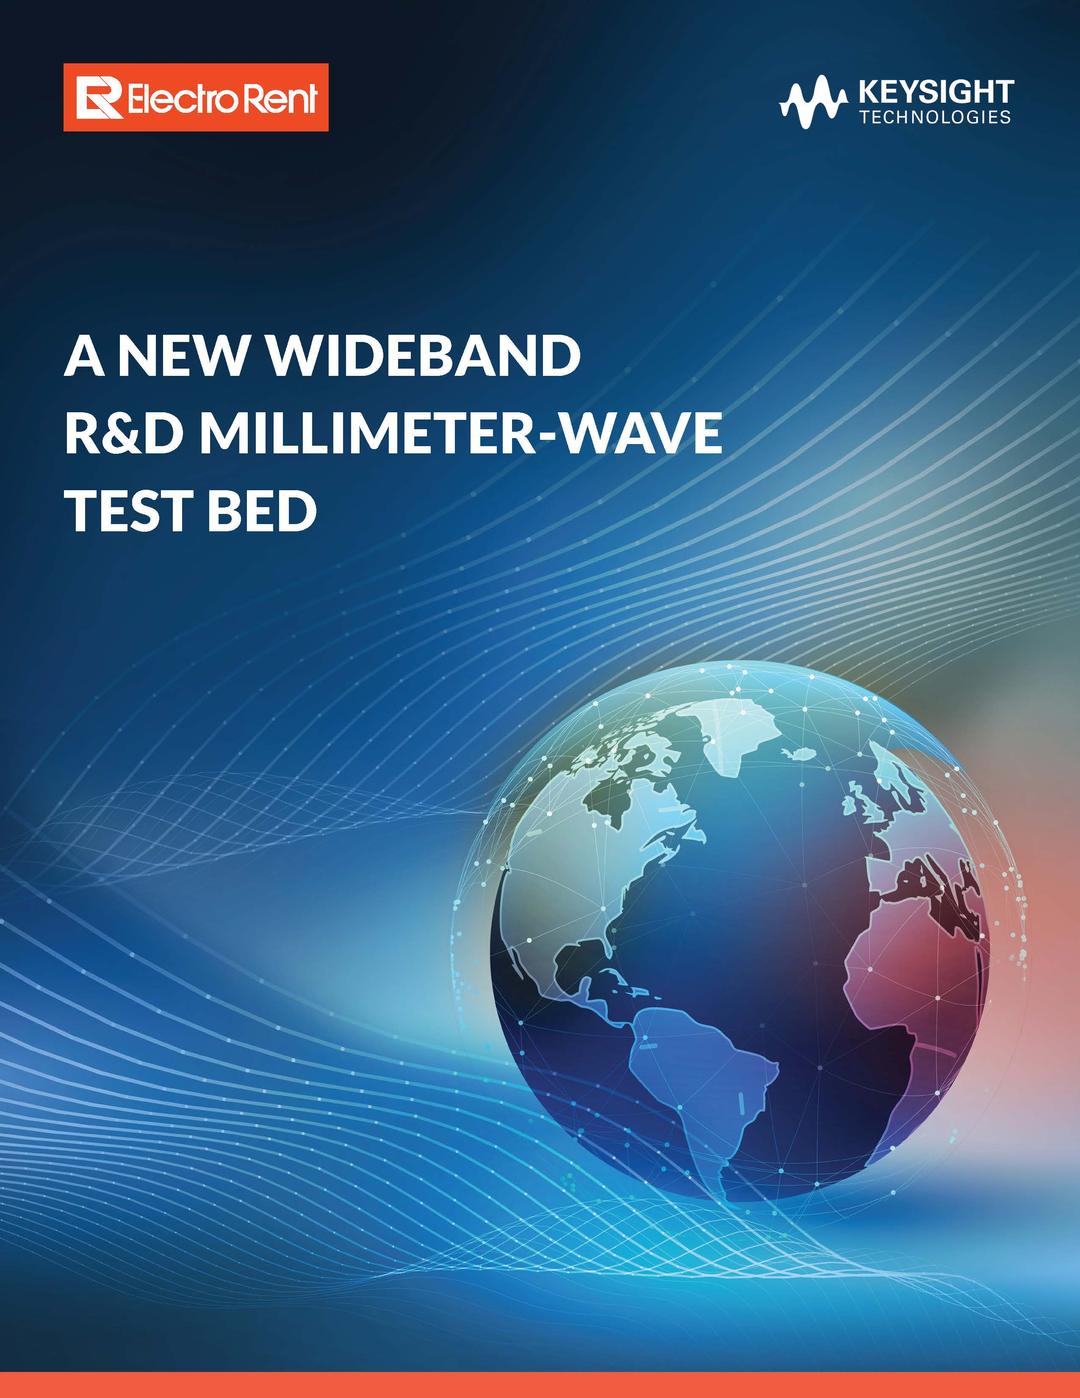 A New WideBand R&D mmWave Test Bed, image